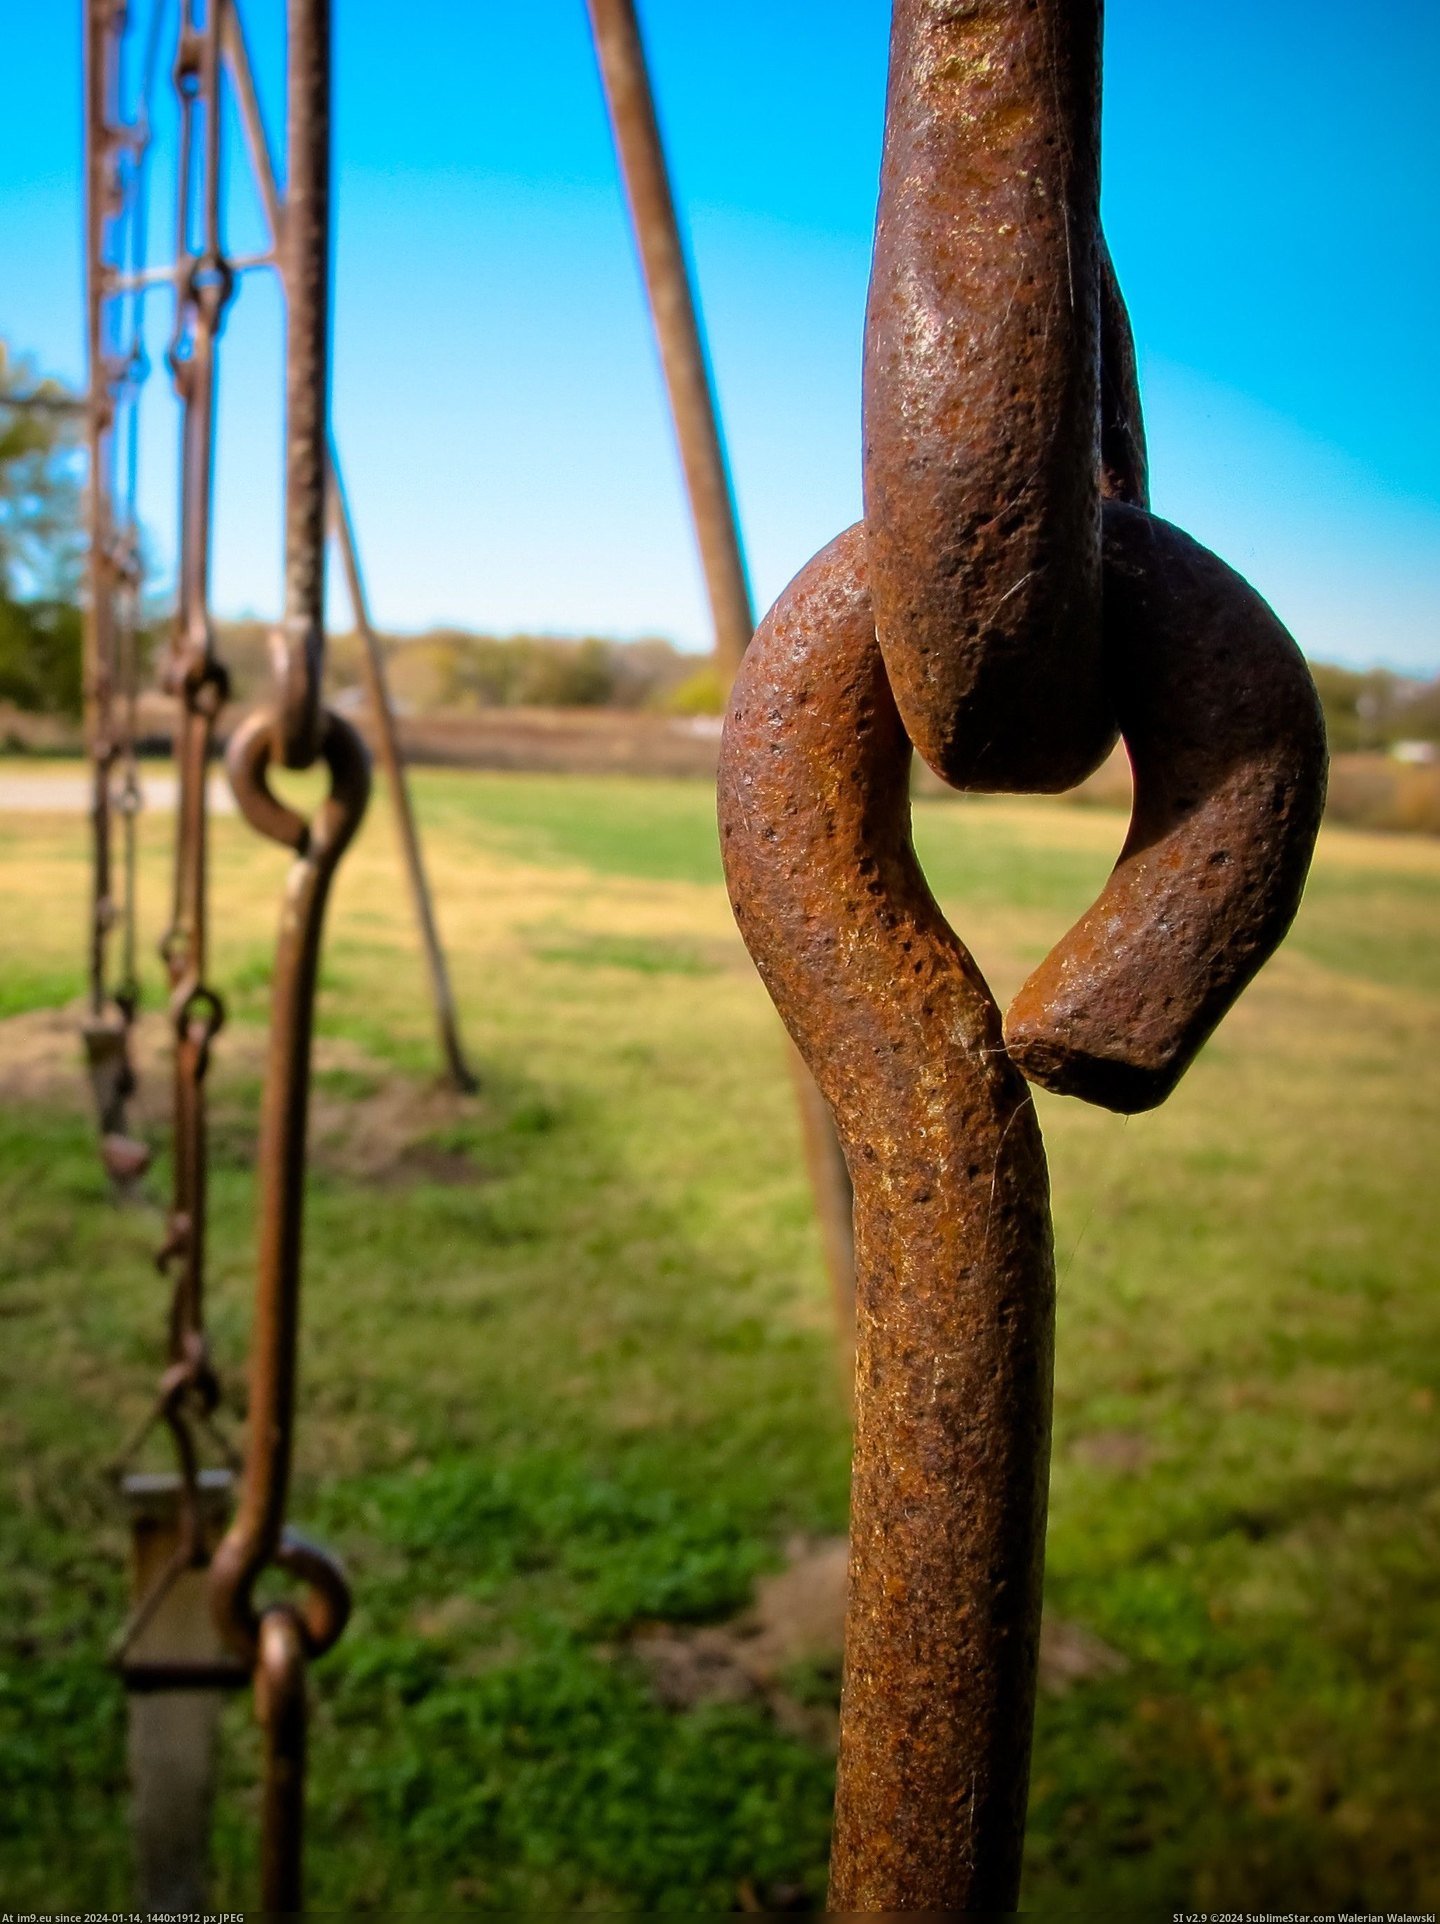 #Old #School #But #Swing #Chains #Hooks #Abandoned #Metal #Set [Pics] I found an old swing set at an abandoned school that didn't have chains, but metal hooks. Pic. (Obraz z album My r/PICS favs))